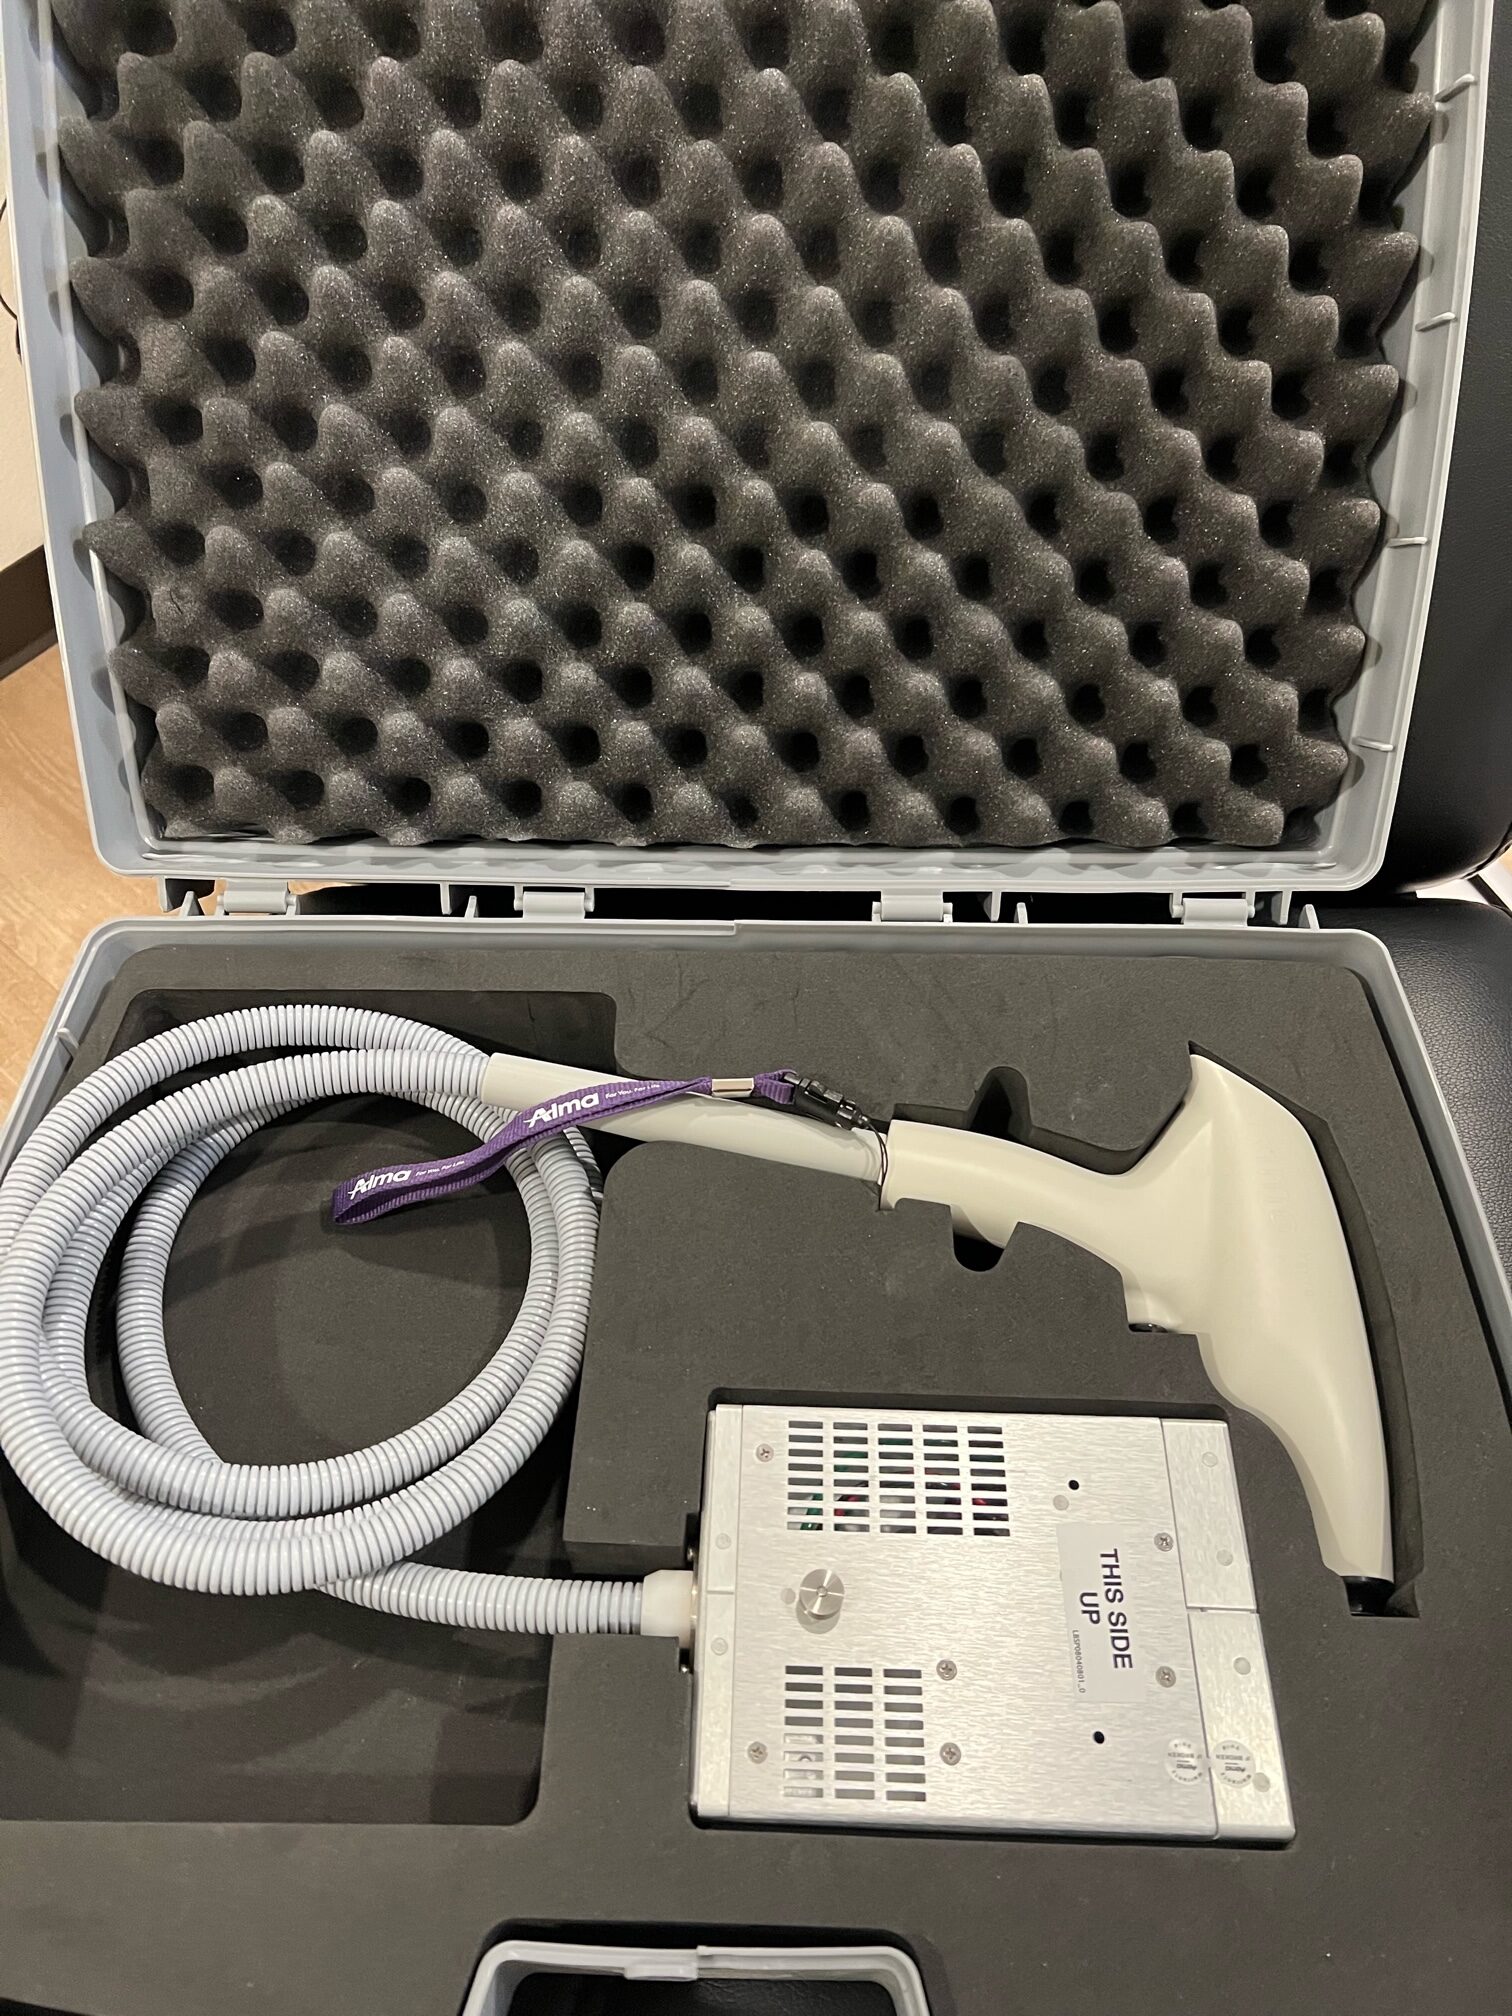 2019 Alma Accent Prime RF Body Contouring with Microplasma Pixel, UniBody,  Unilarge, Minispeed, & Ultraspeed Handpieces - Free Shipping(zh/gun)s -  Rock Bottom Lasers